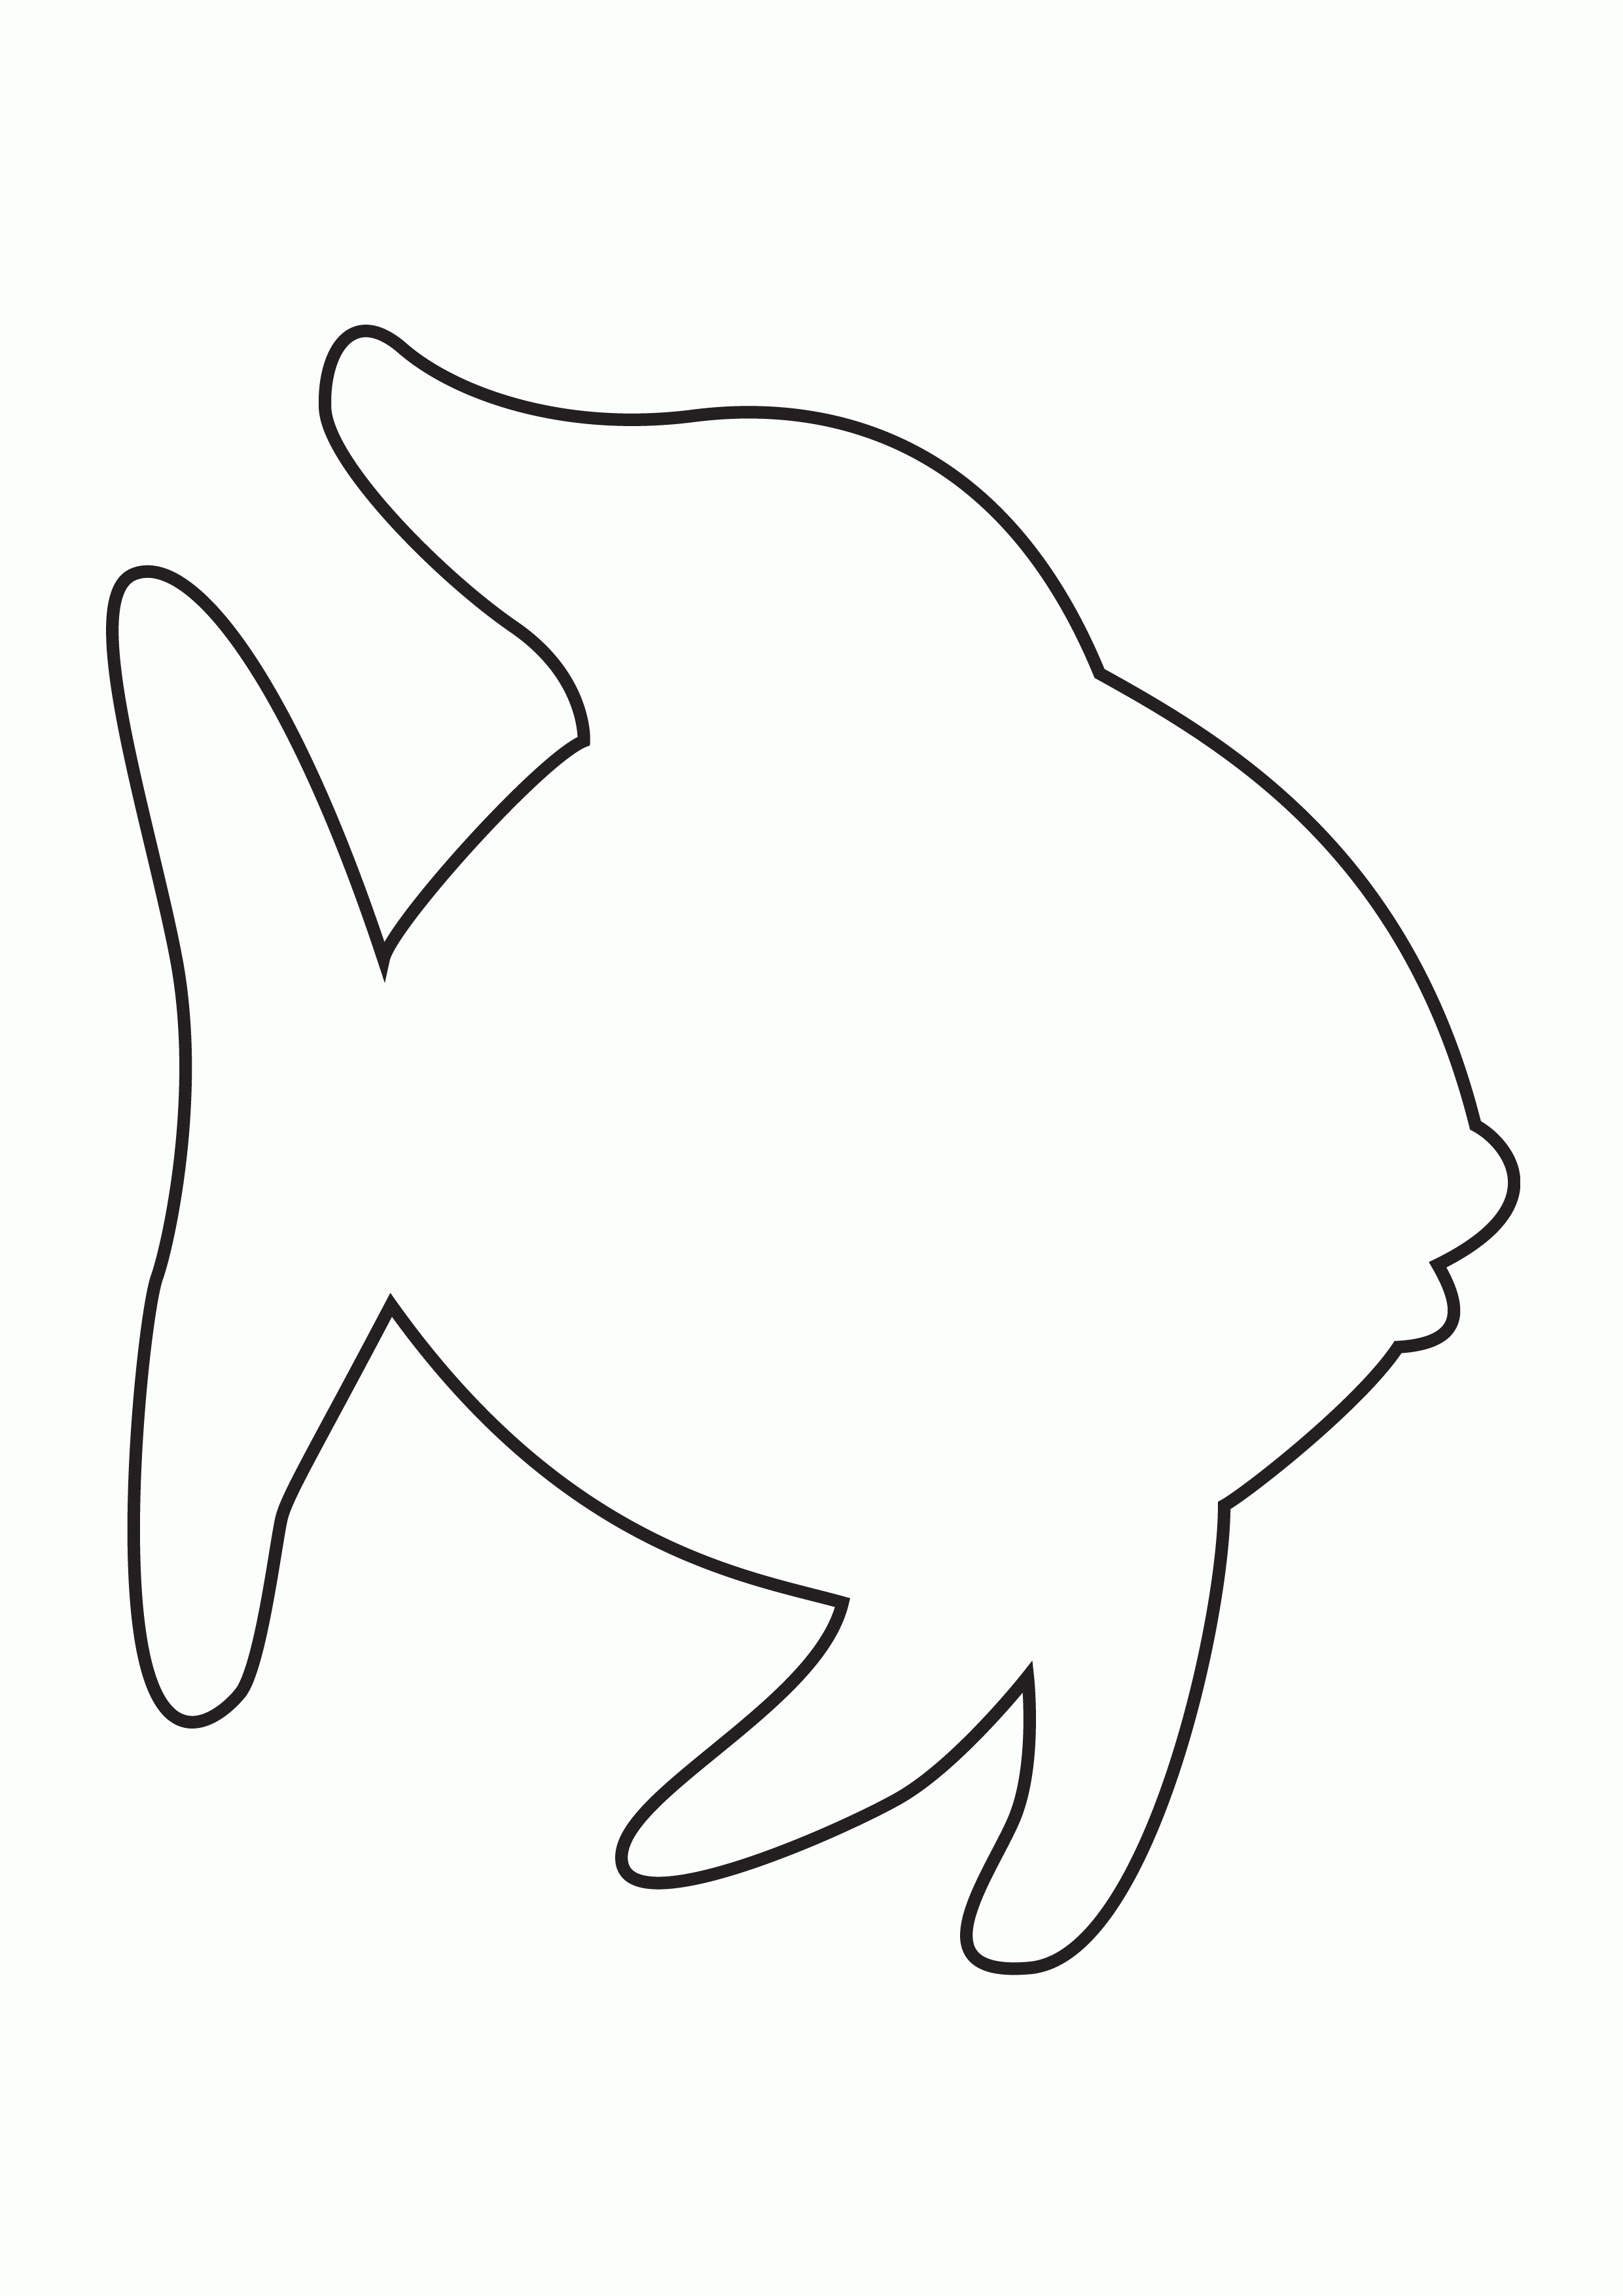 Fish Coloring Page Outline - High Quality Coloring Pages